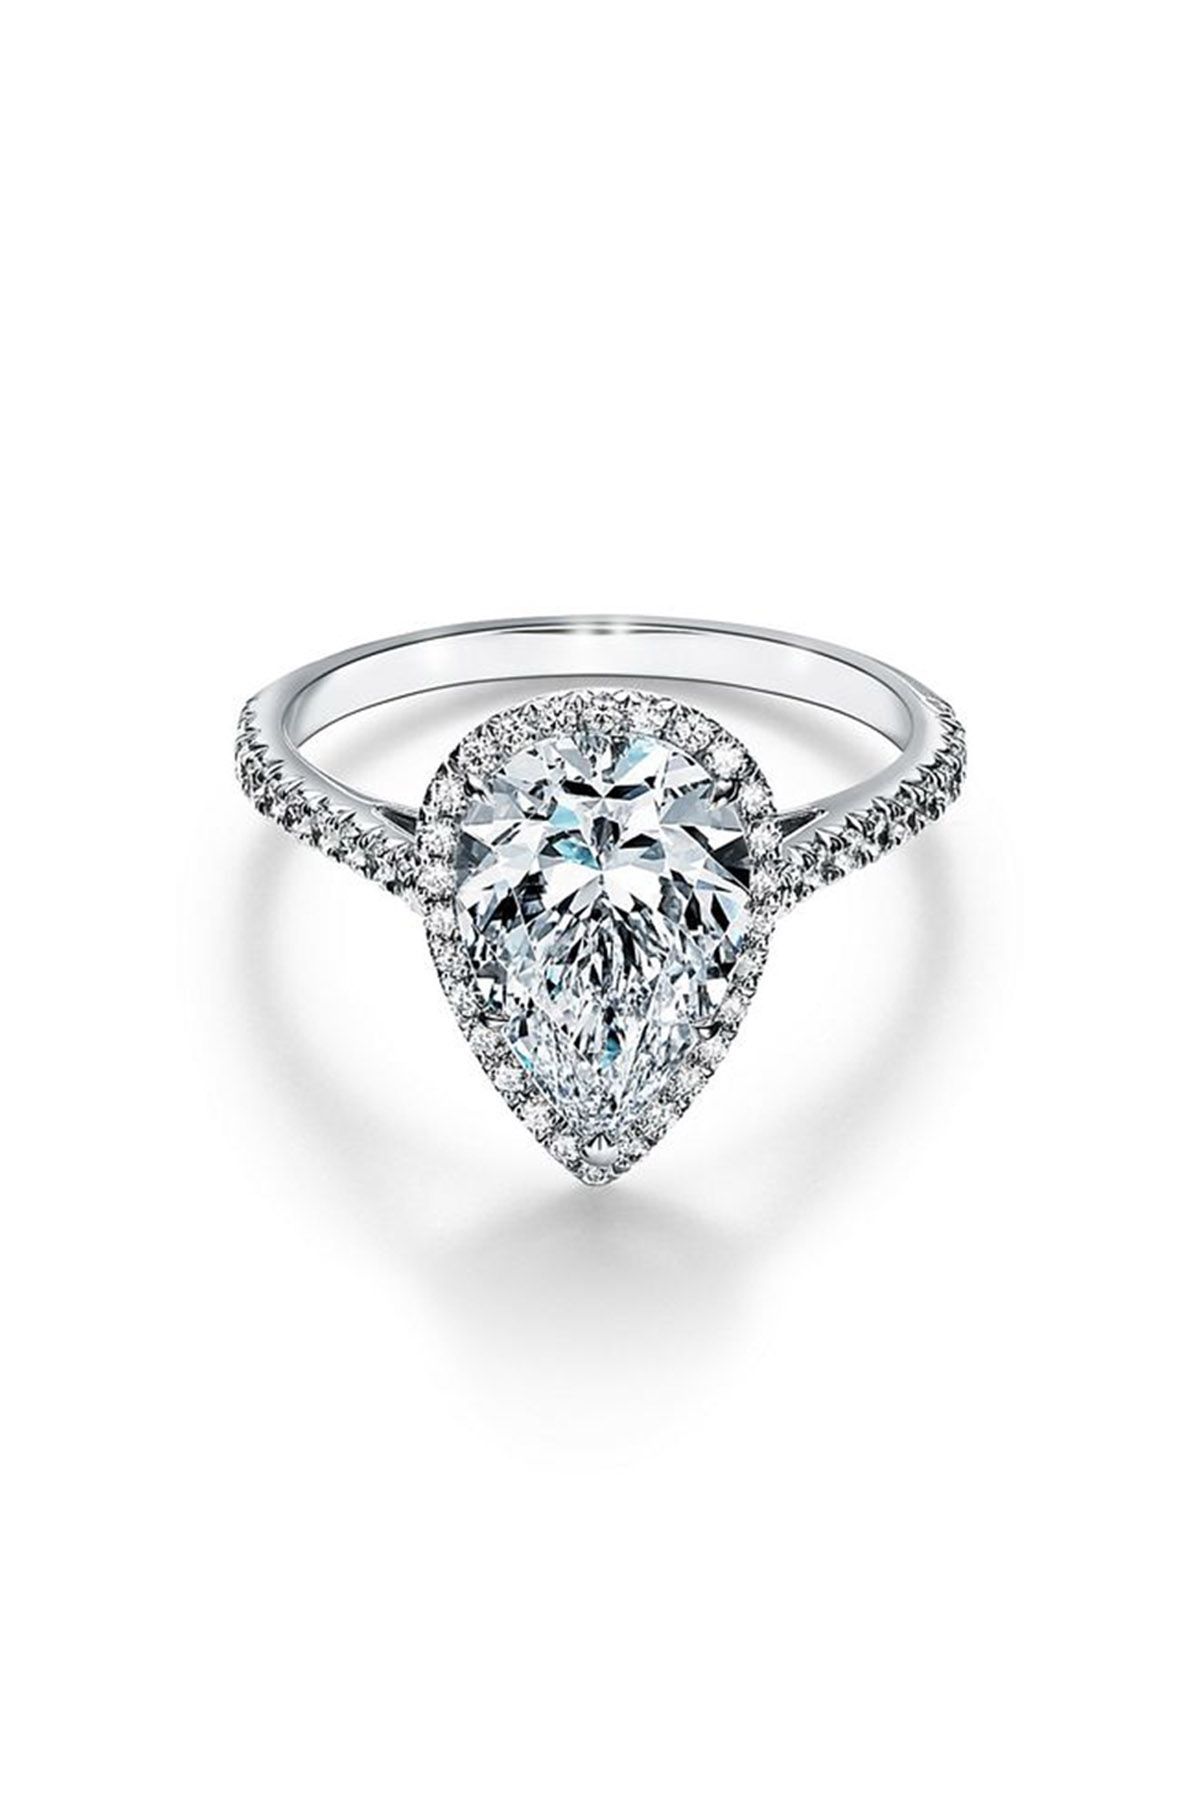 can you buy a tiffany engagement ring without the diamond